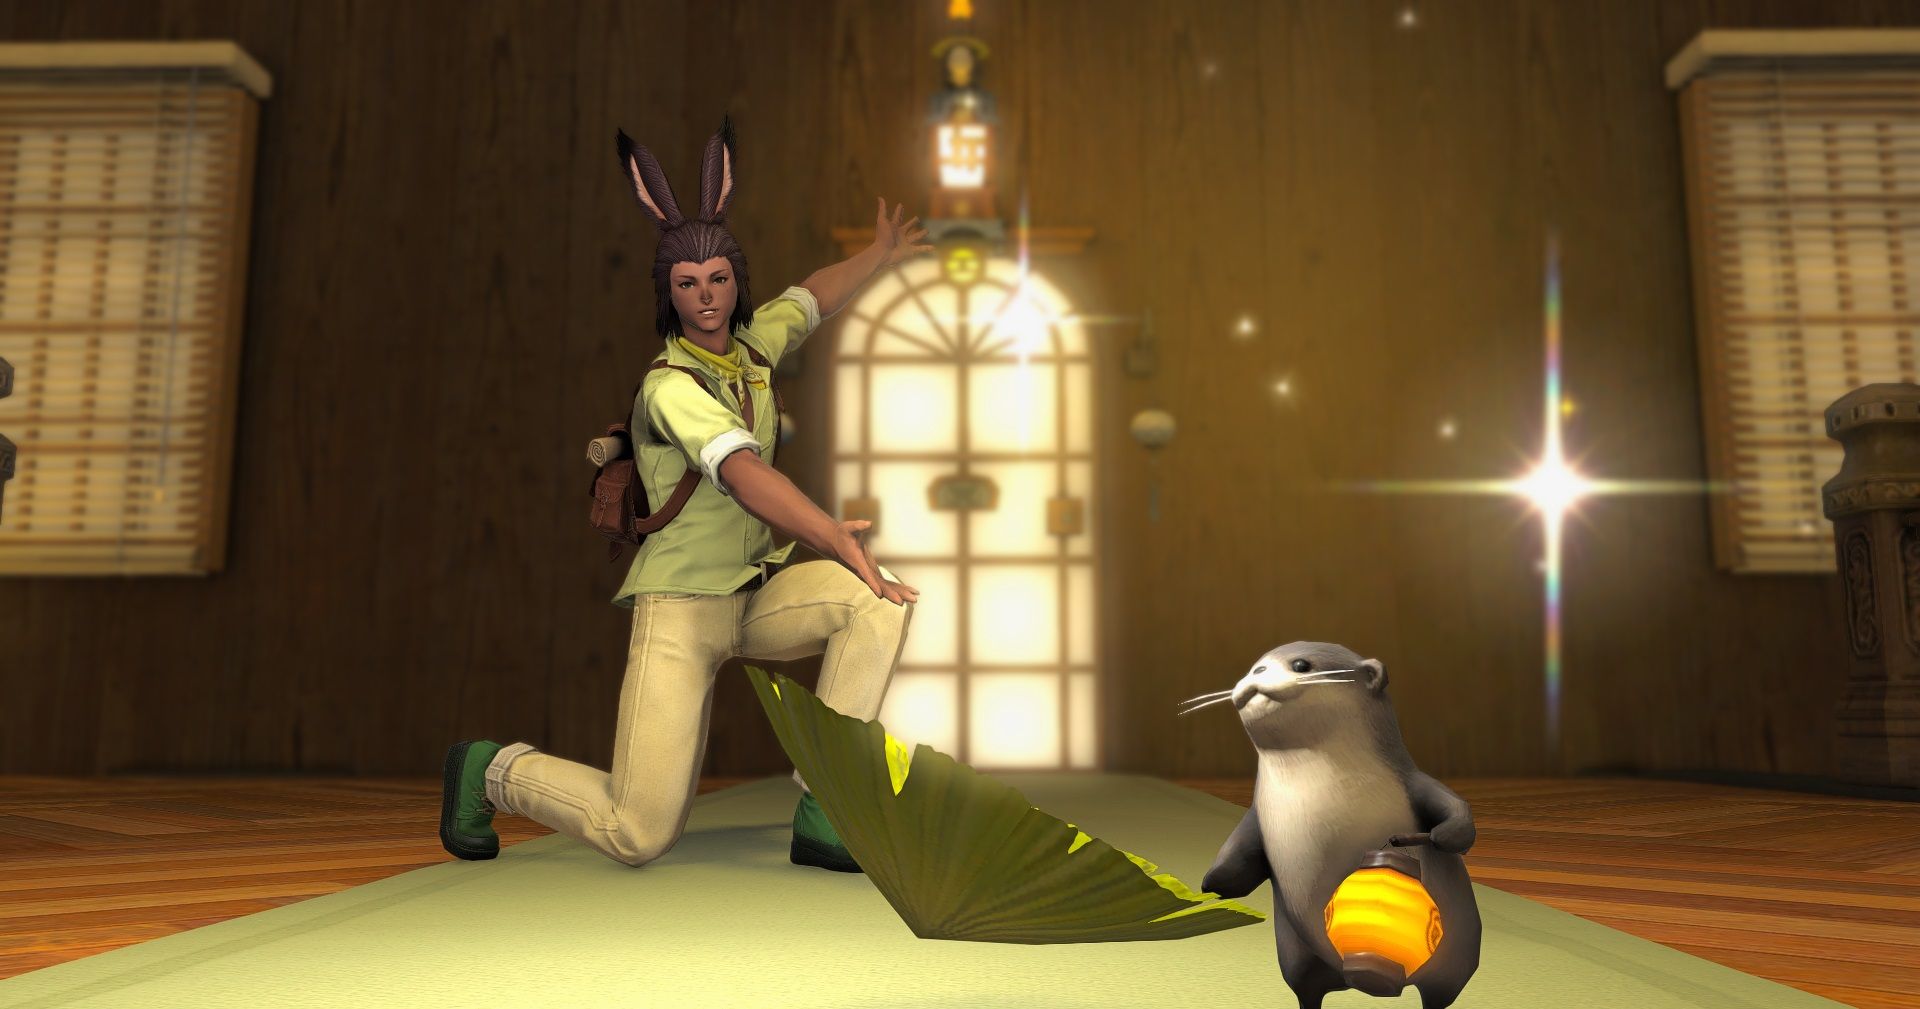 FF14 Otter by the Water character with the otter